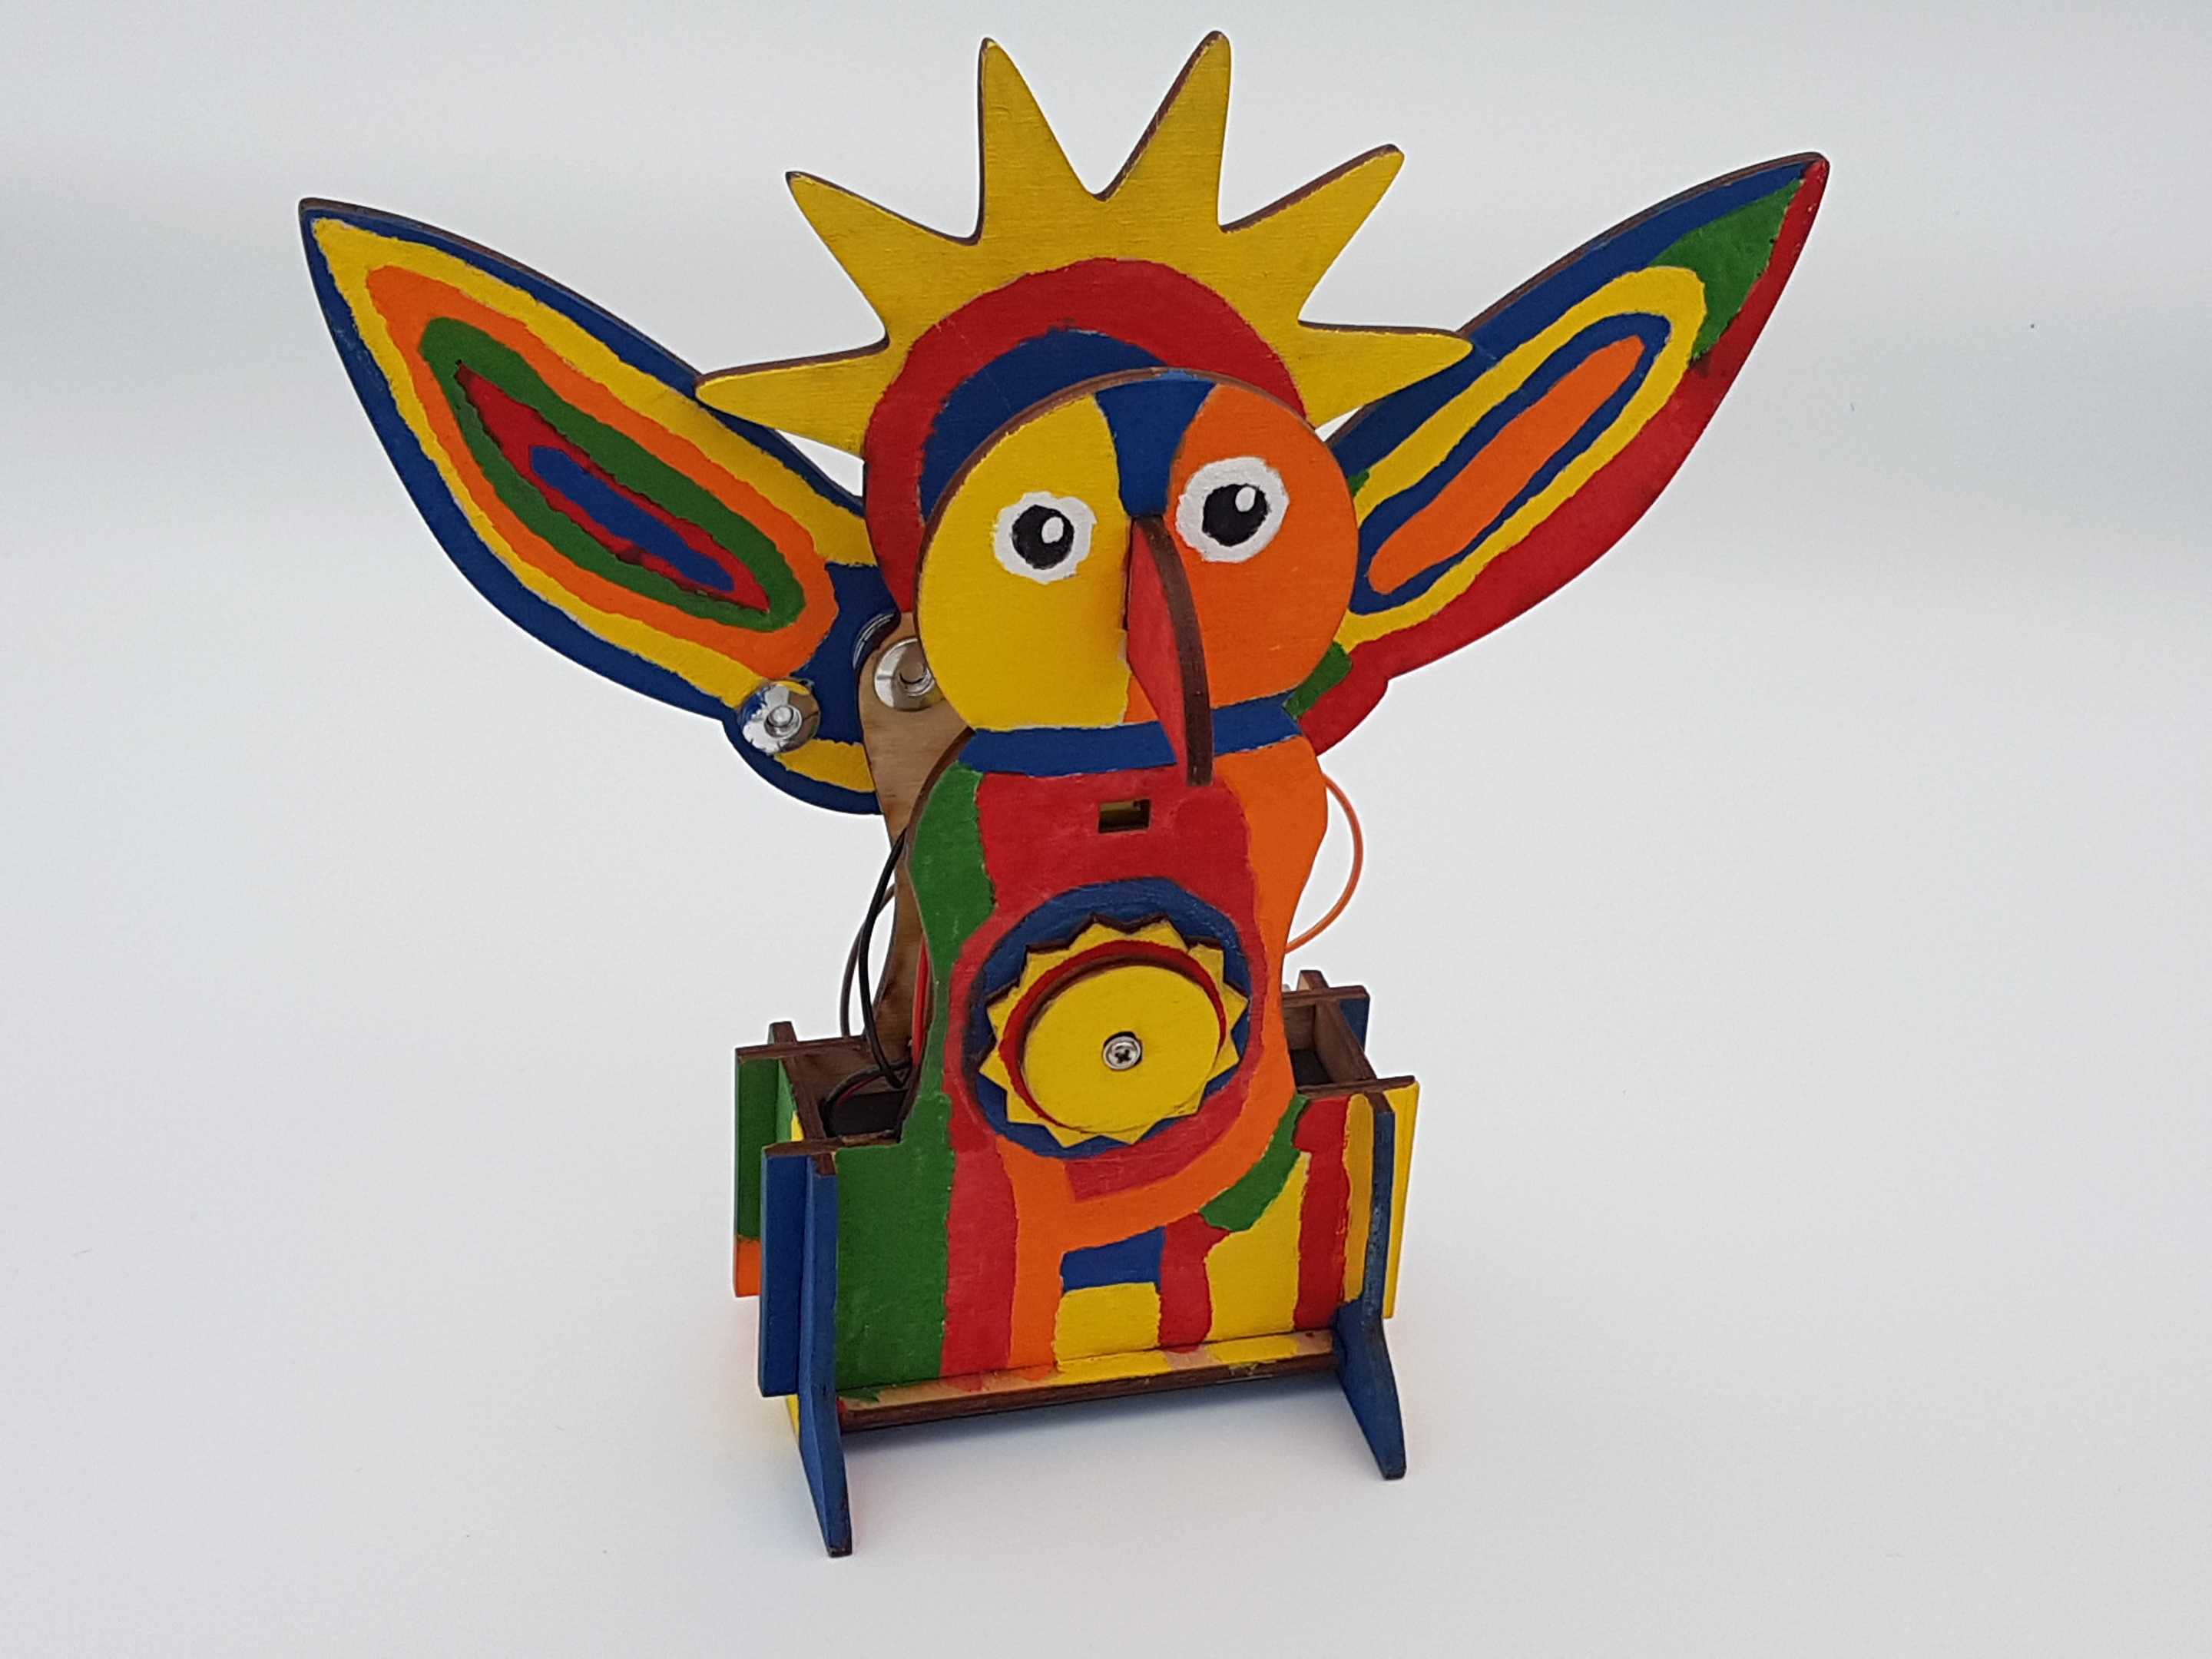 Colorfully painted small wooden robot resembling a Sun God